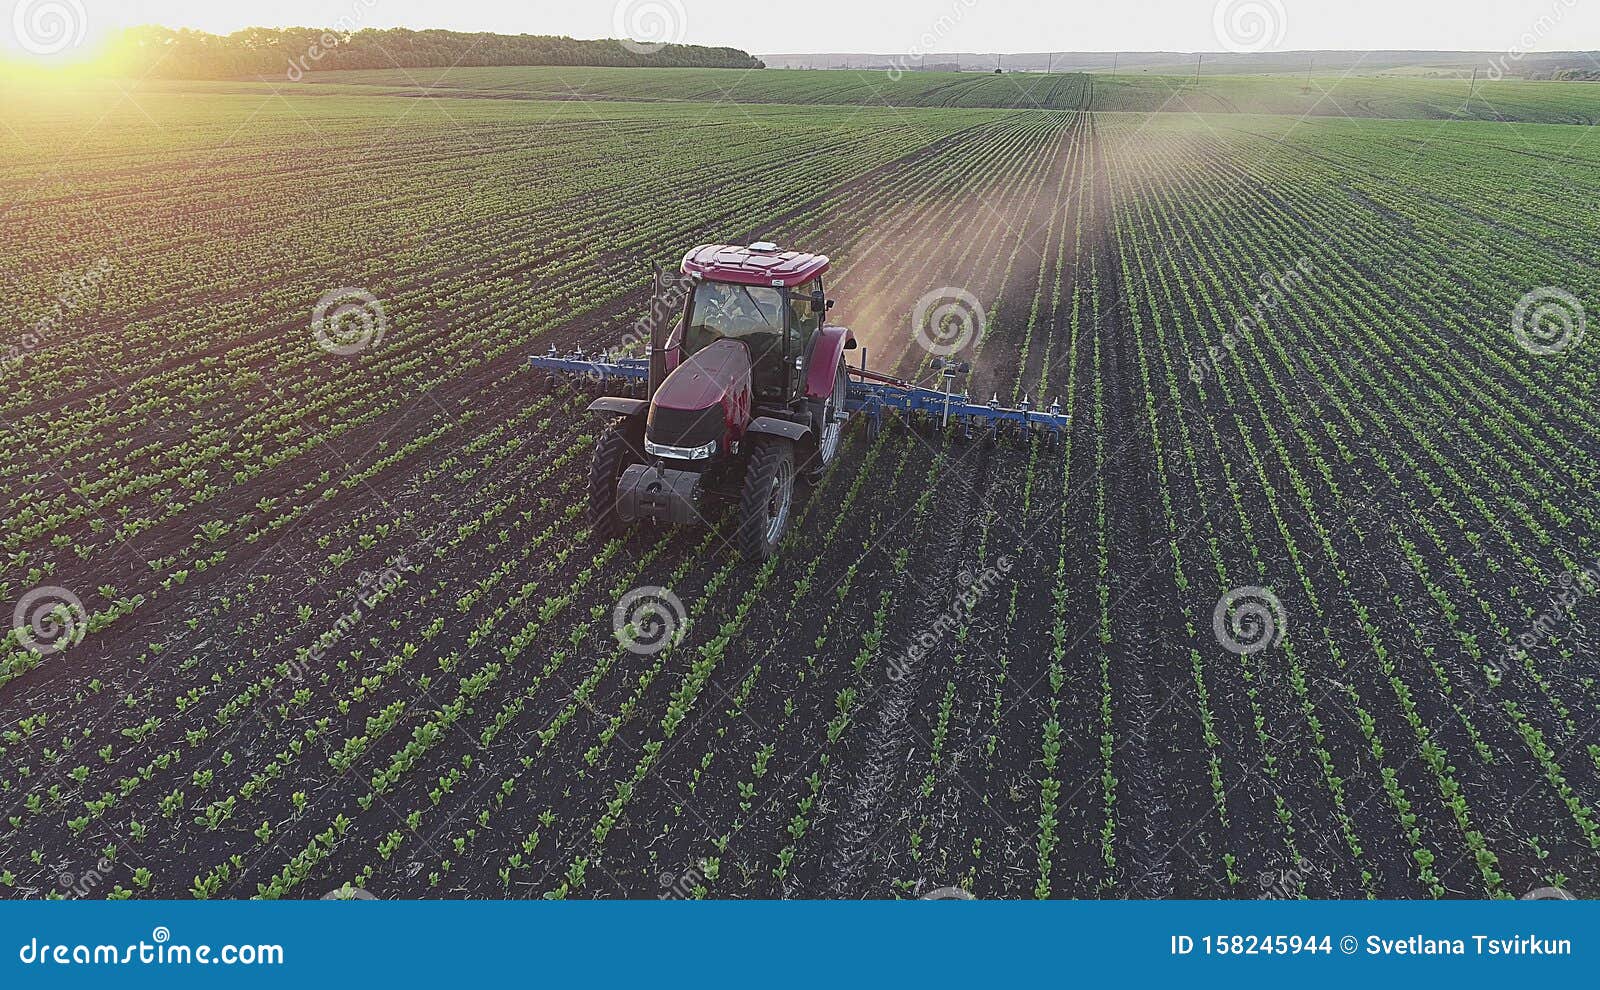 beautiful view of agricultural tractor in the field on the sunset.